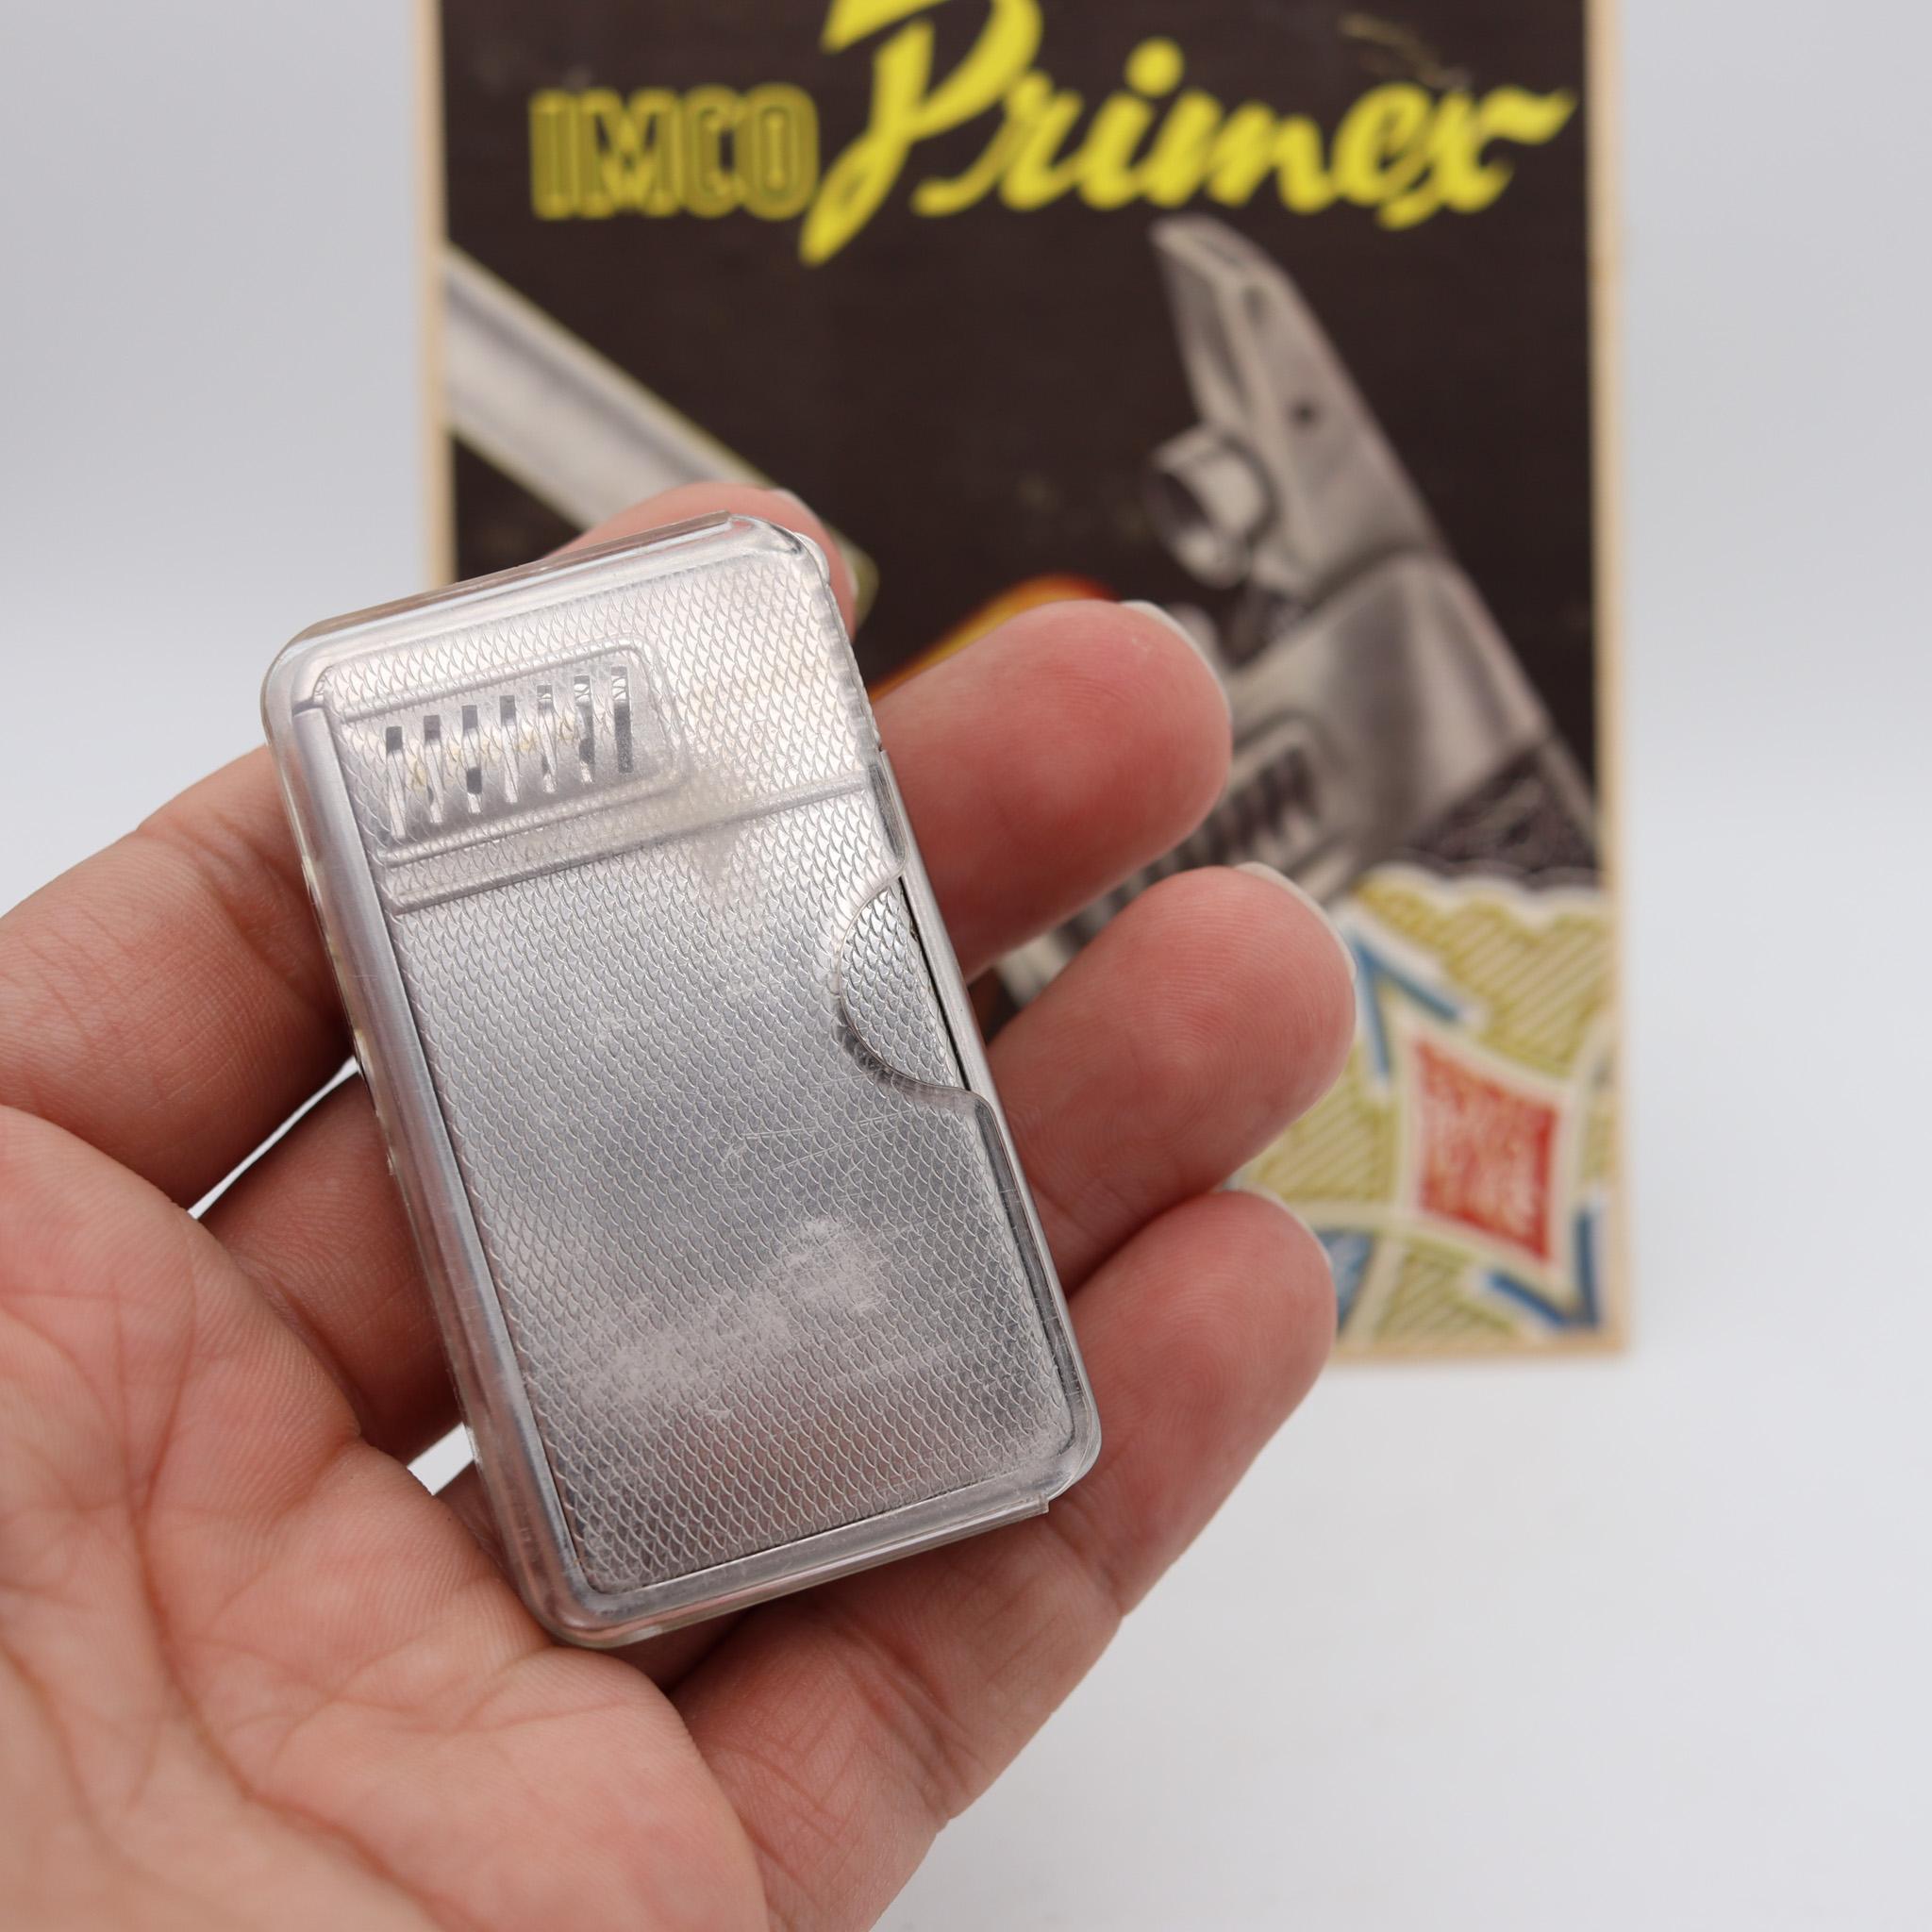 IMCO 6300 Primex 1953 Julius Franz Meister Petrol Lighter In Chromed Steel MIB In Excellent Condition For Sale In Miami, FL